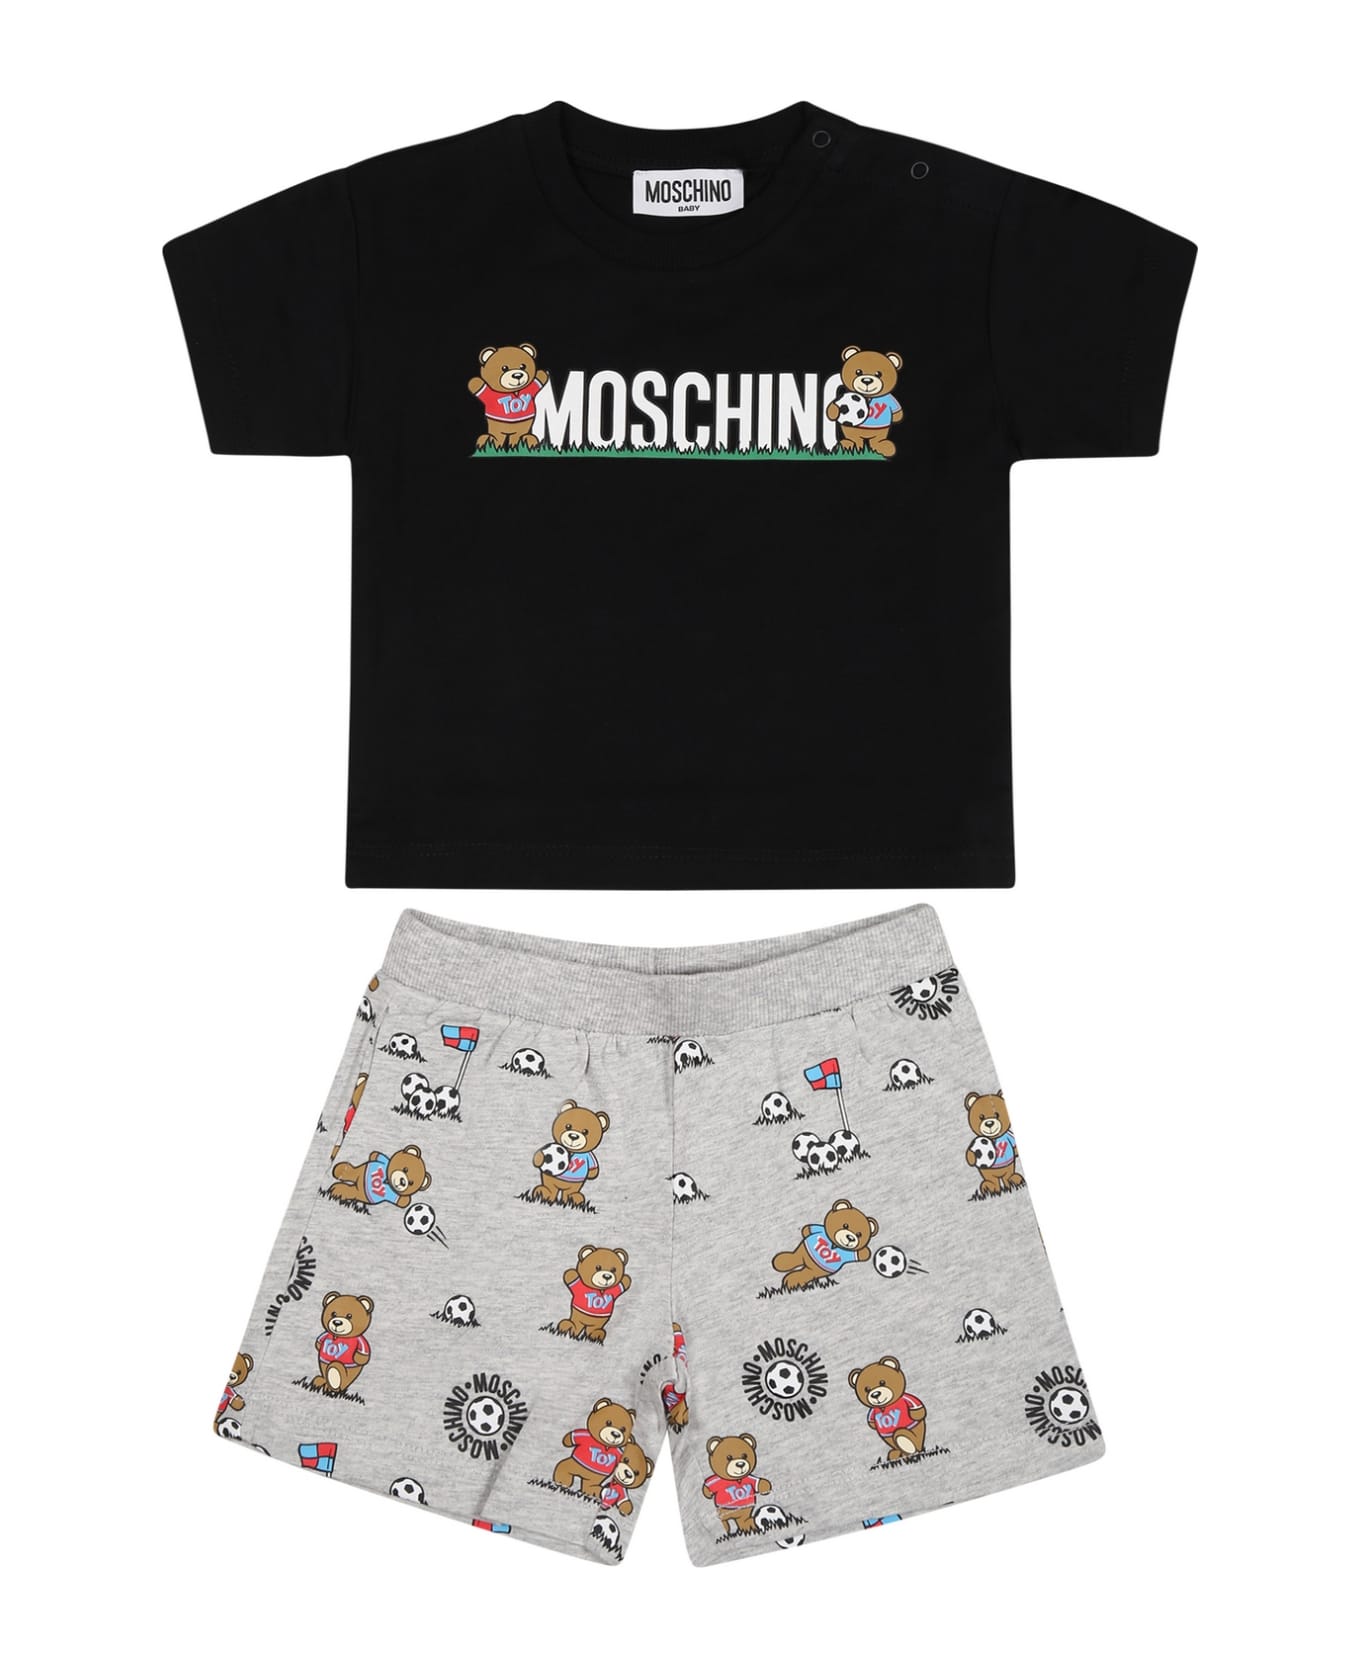 Moschino Black Suit For Baby Boy With Teddy Bear And Logo - Black ボトムス